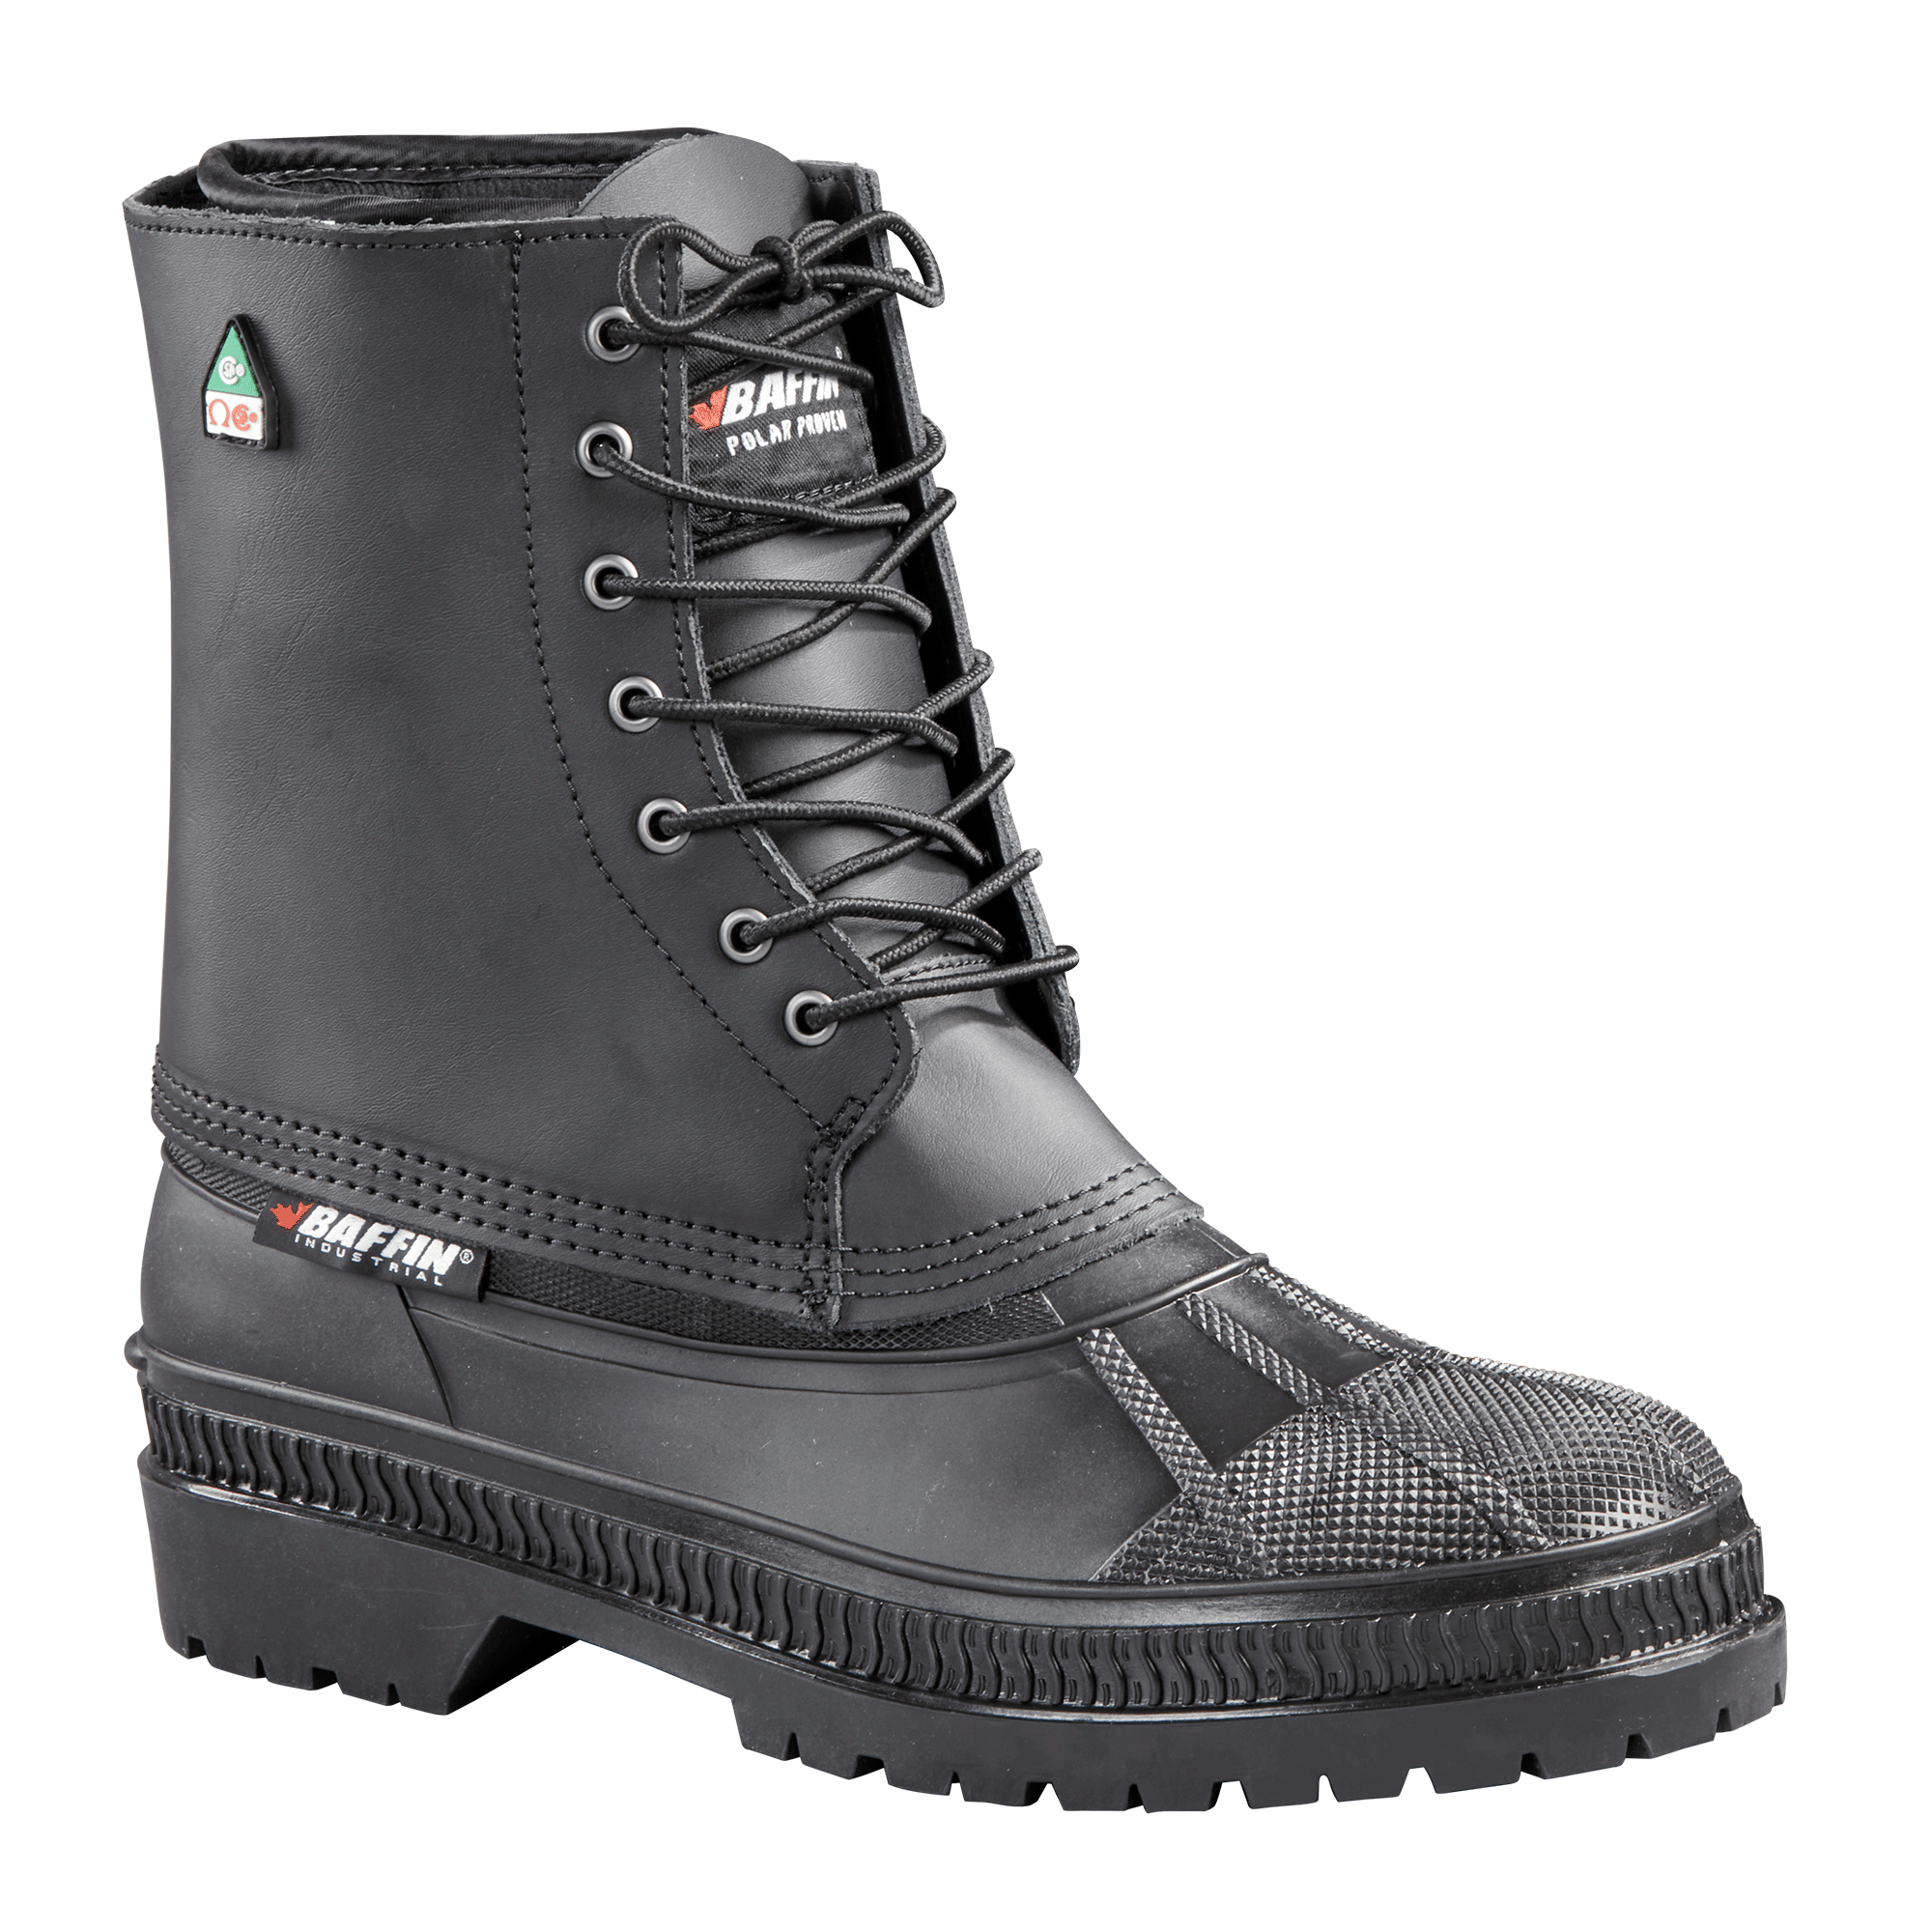 WHITEHORSE (Safety Toe & Plate) | Men's Boot